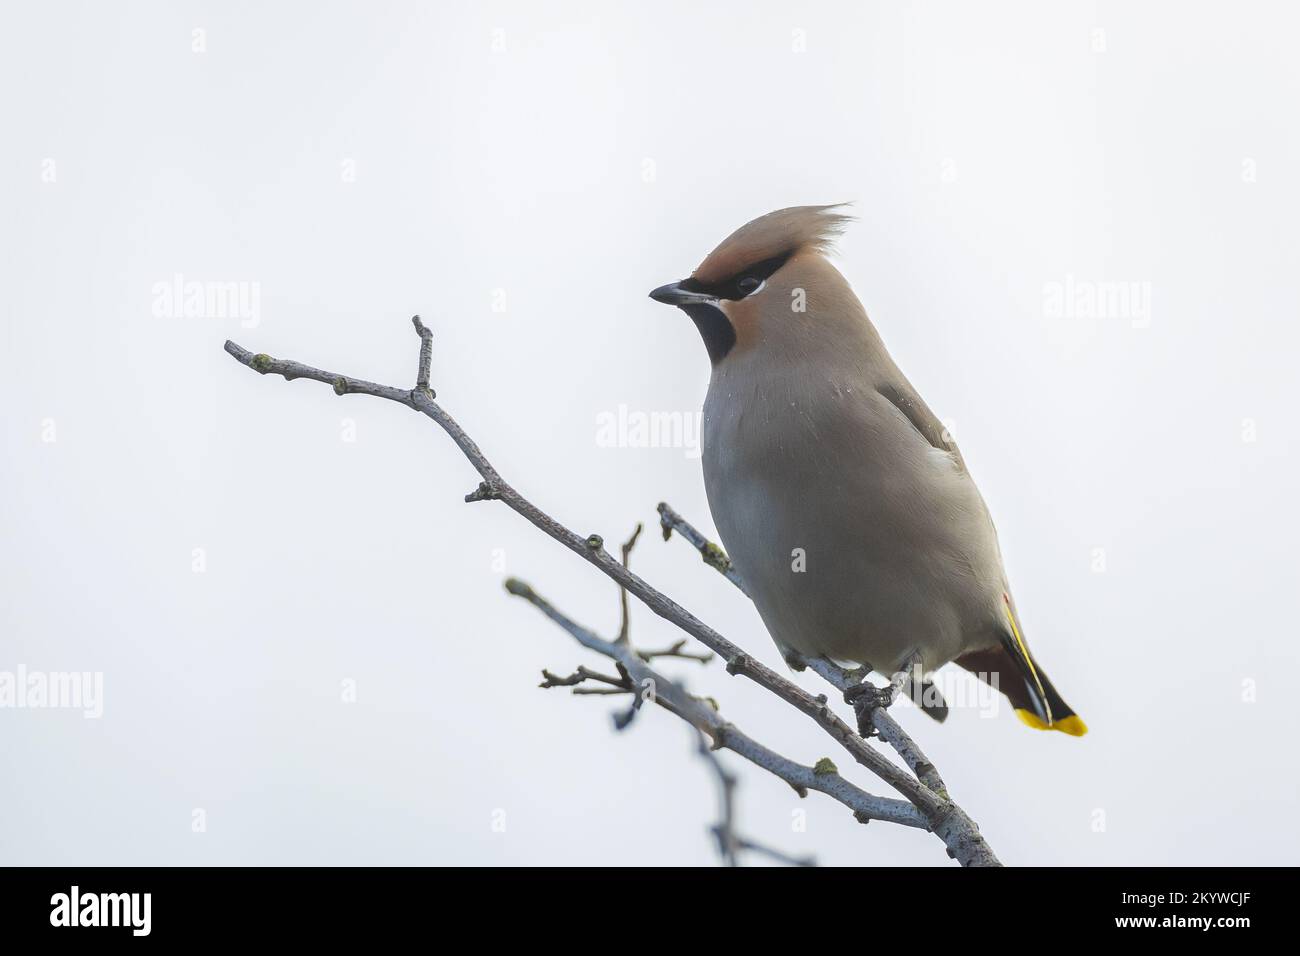 The Bohemian waxwing, Bombycilla garrulus, migratory bird is a rare visitor in the Netherlands that attracts a lot of bird spotters. Stock Photo